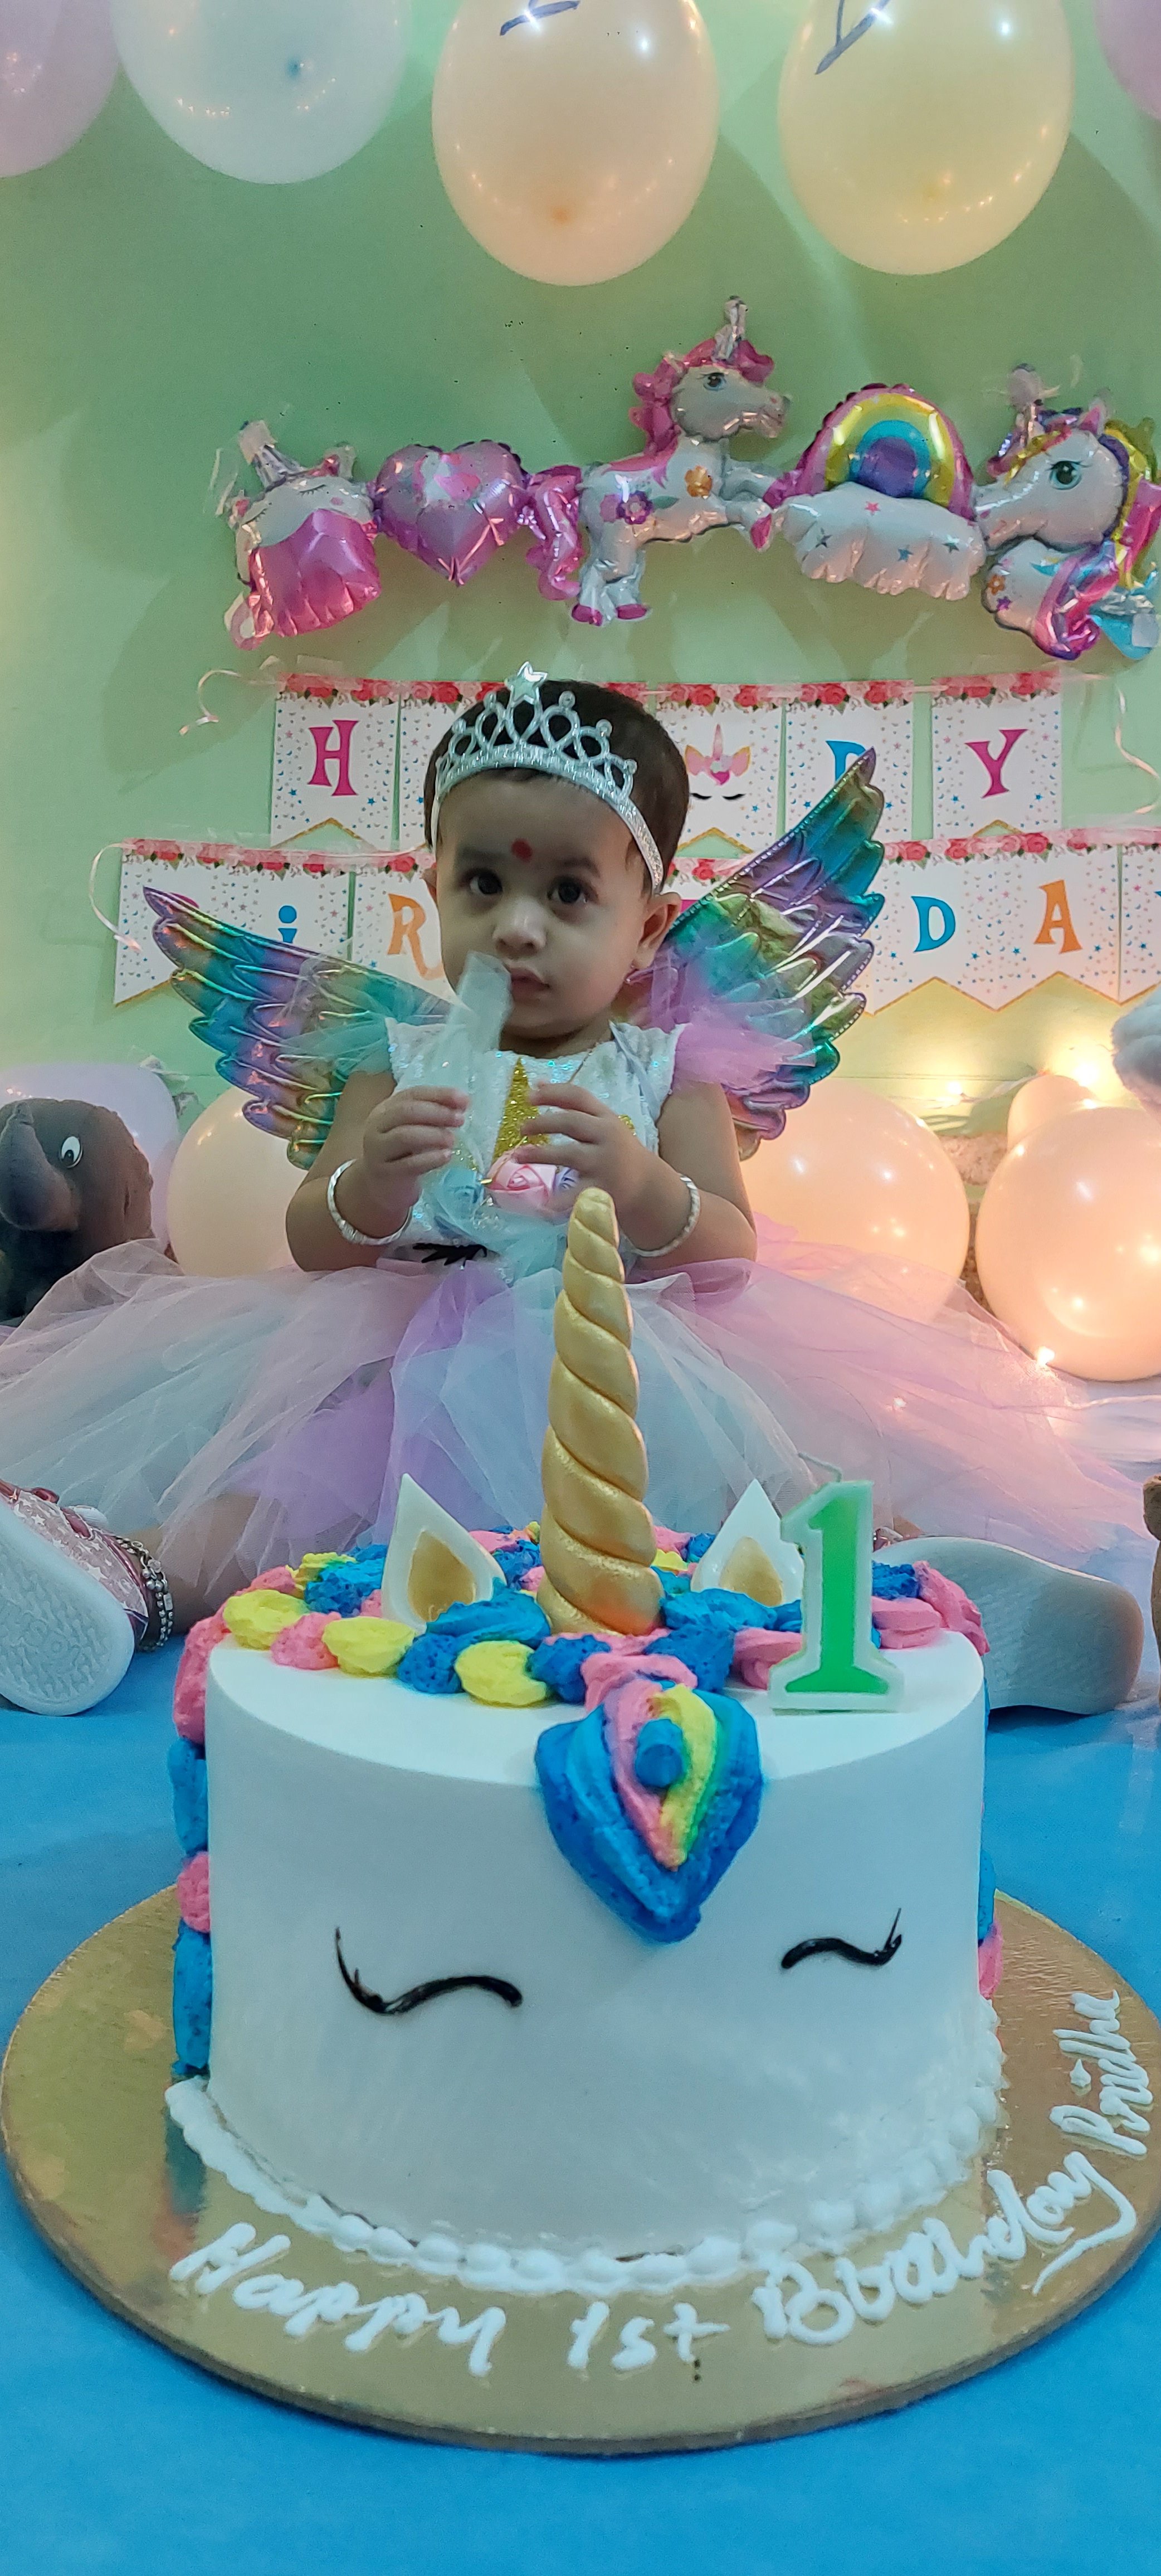 Unicorn Themed Birthday Party Decorations for your Kids Grand Birthday  Party in Mumbai